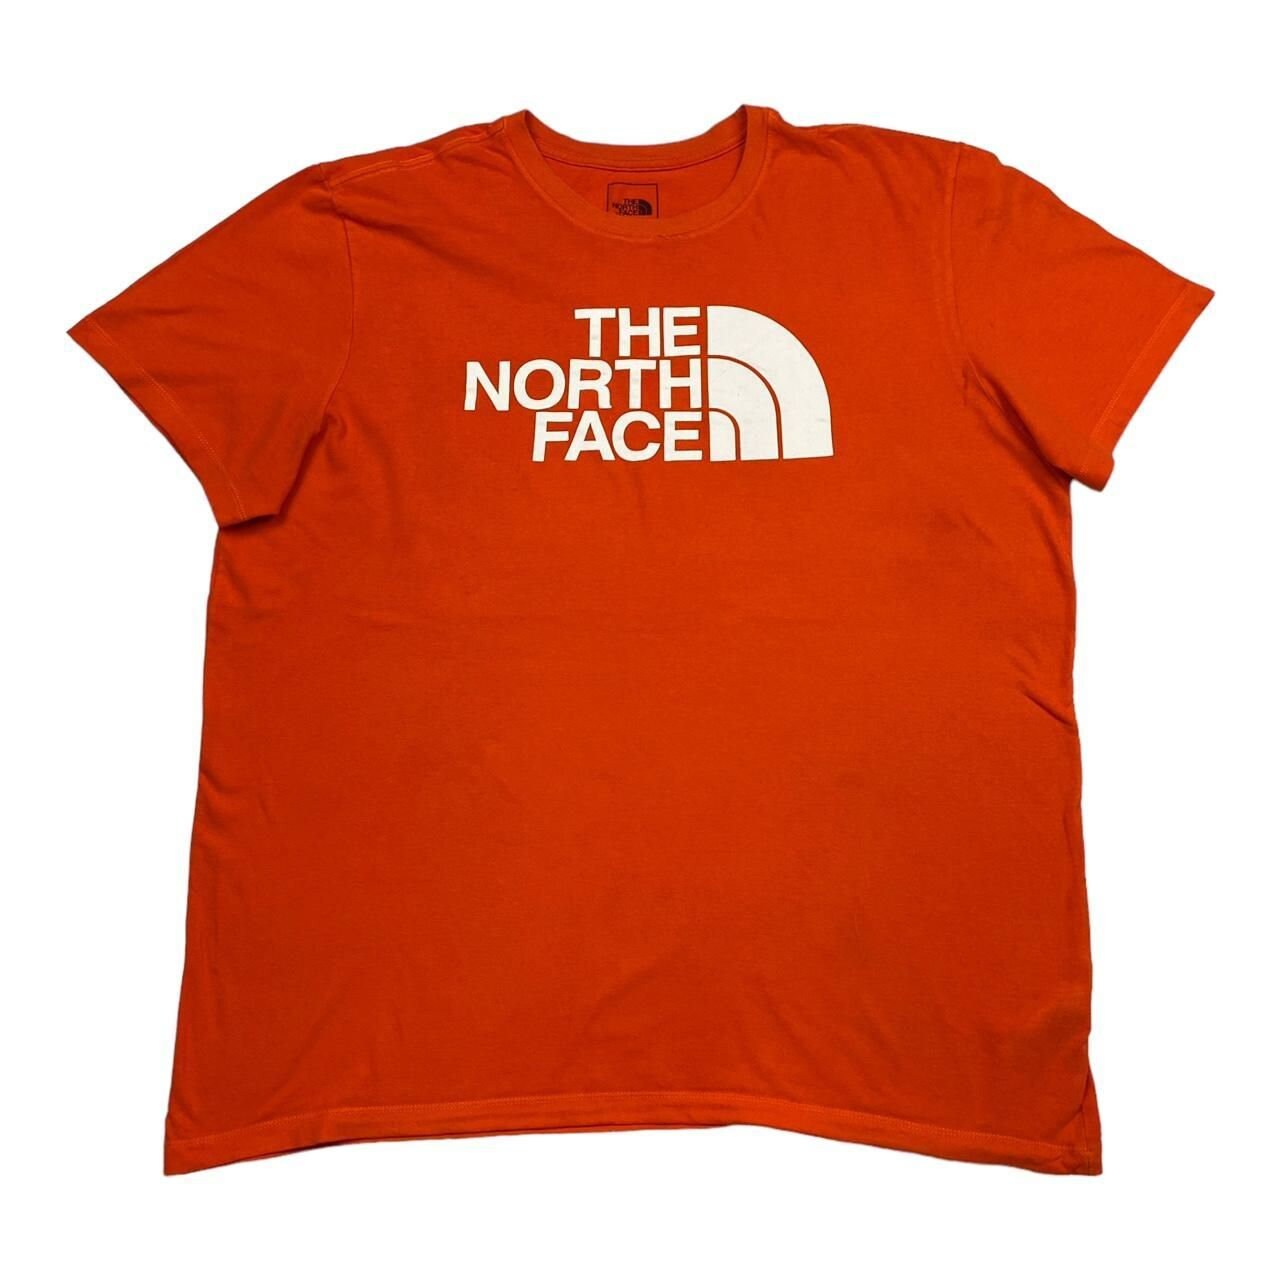 The North Face A5 Red & Orange Cropped Tank Top Built In Bra Size XL